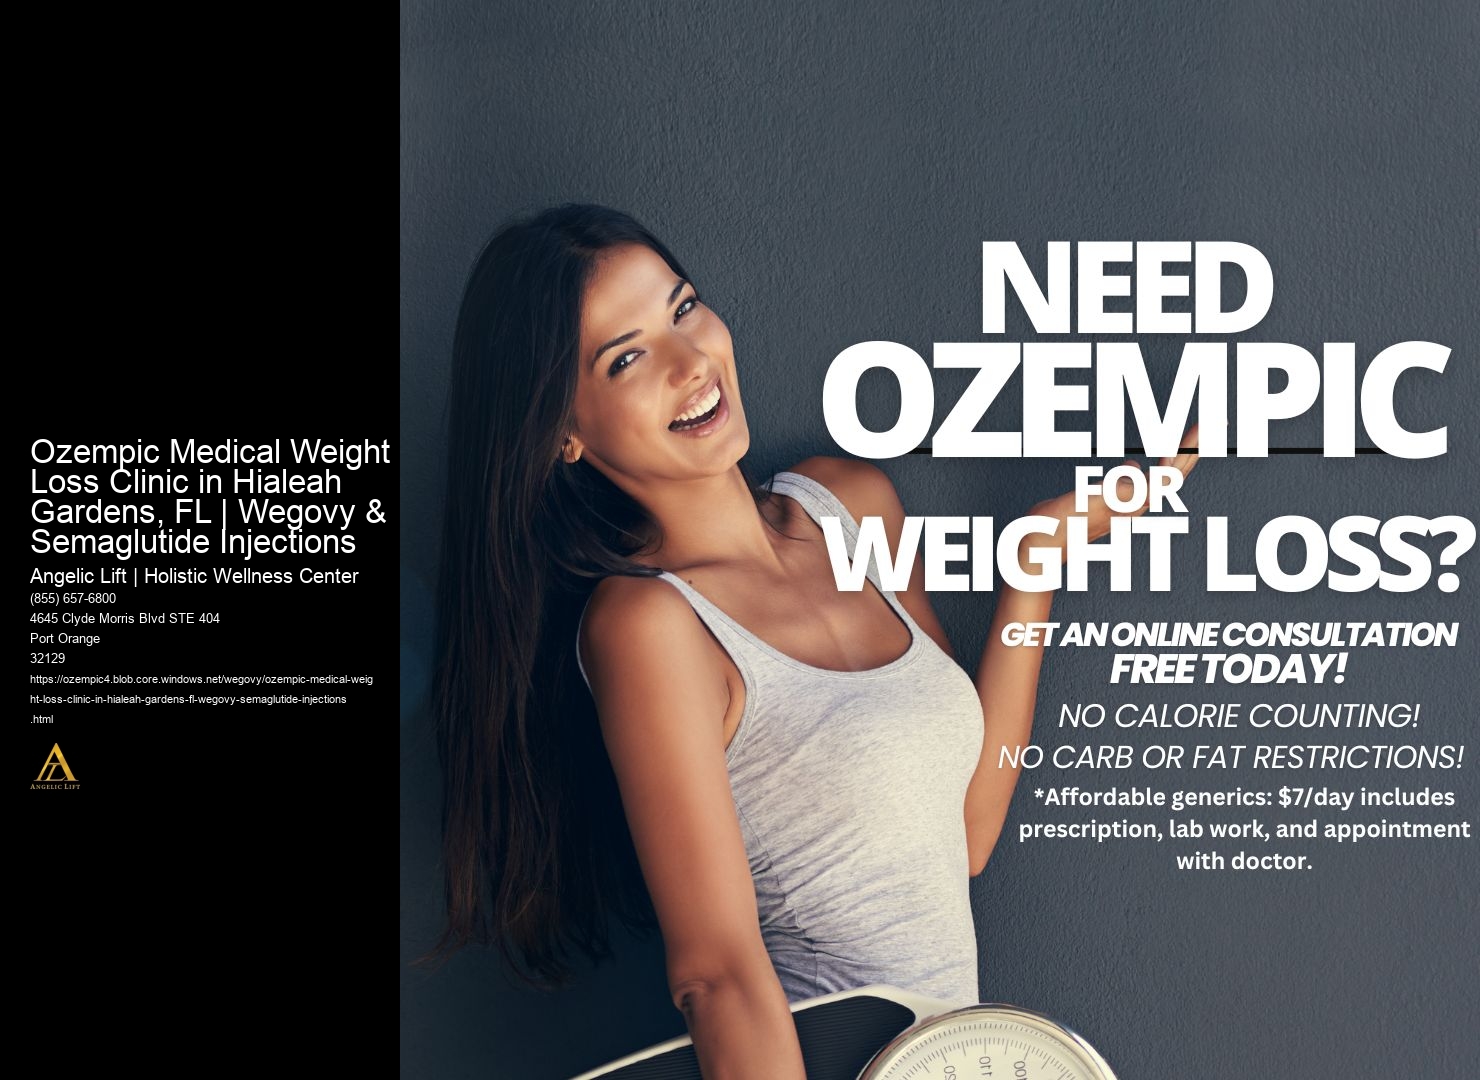 Ozempic Medical Weight Loss Clinic in Hialeah Gardens, FL | Wegovy & Semaglutide Injections